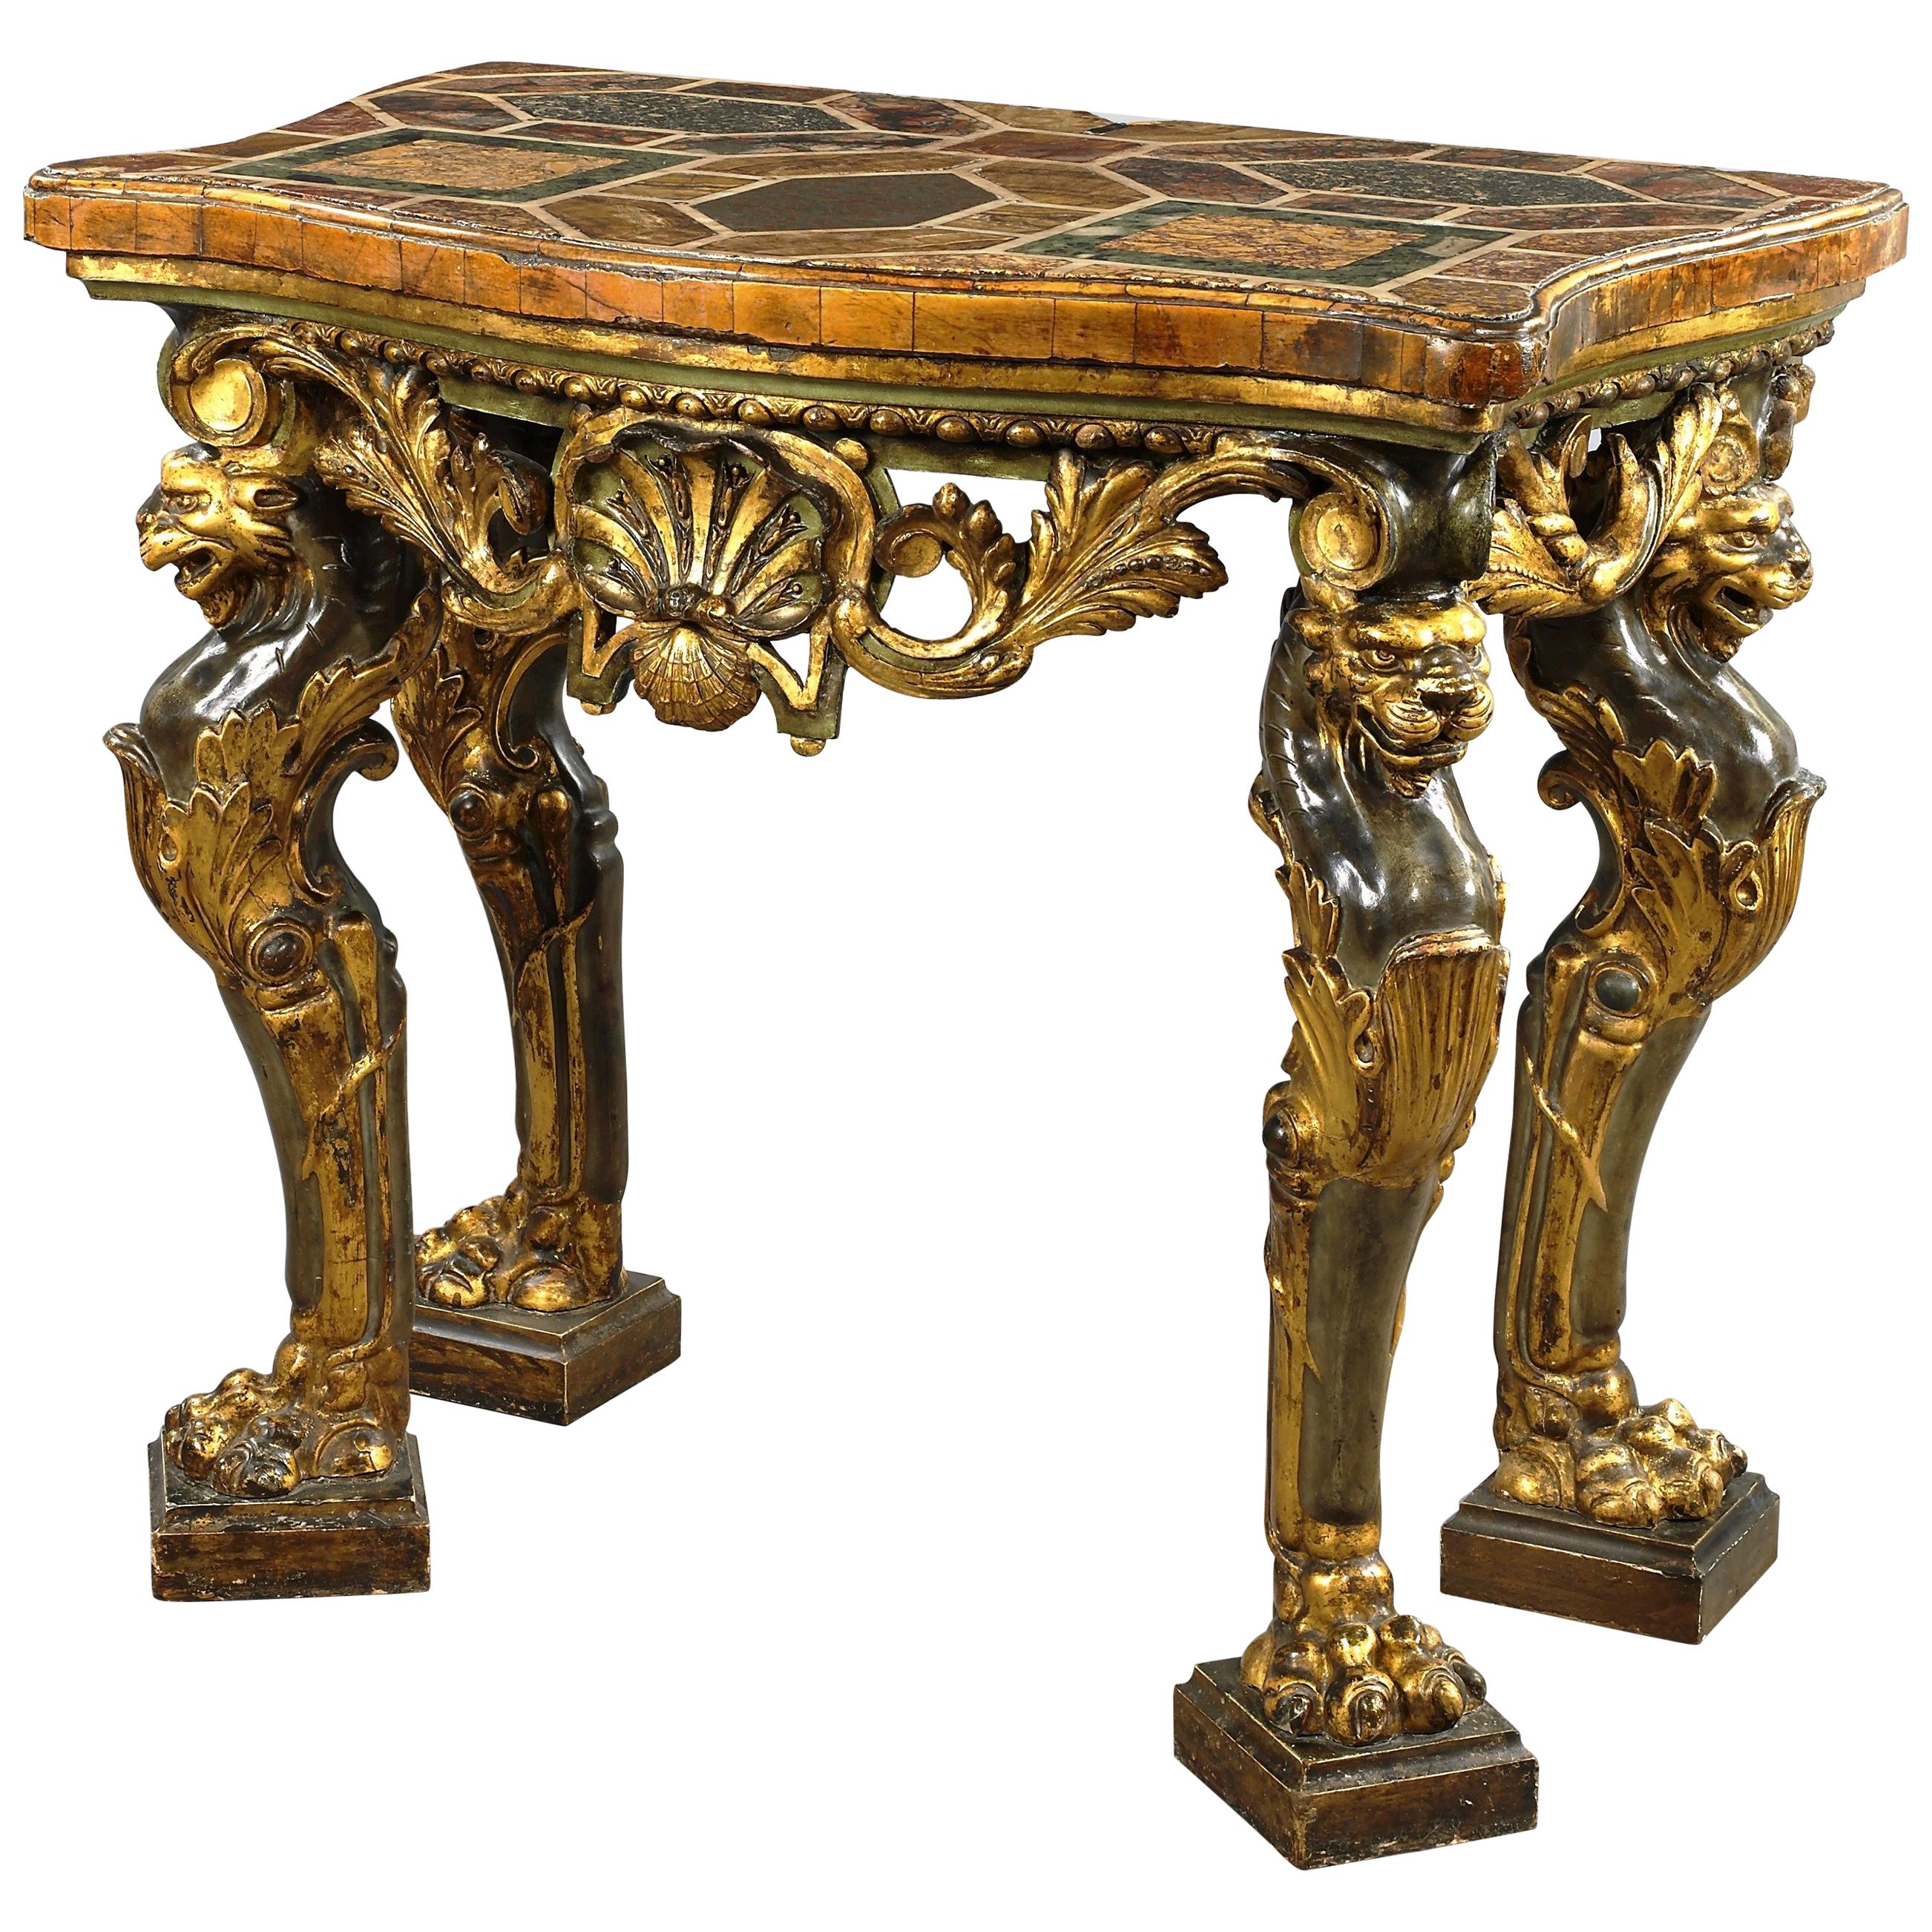 Carved Giltwood Italian Console Table, Made of Inlays of Marbles 19th Century im Angebot